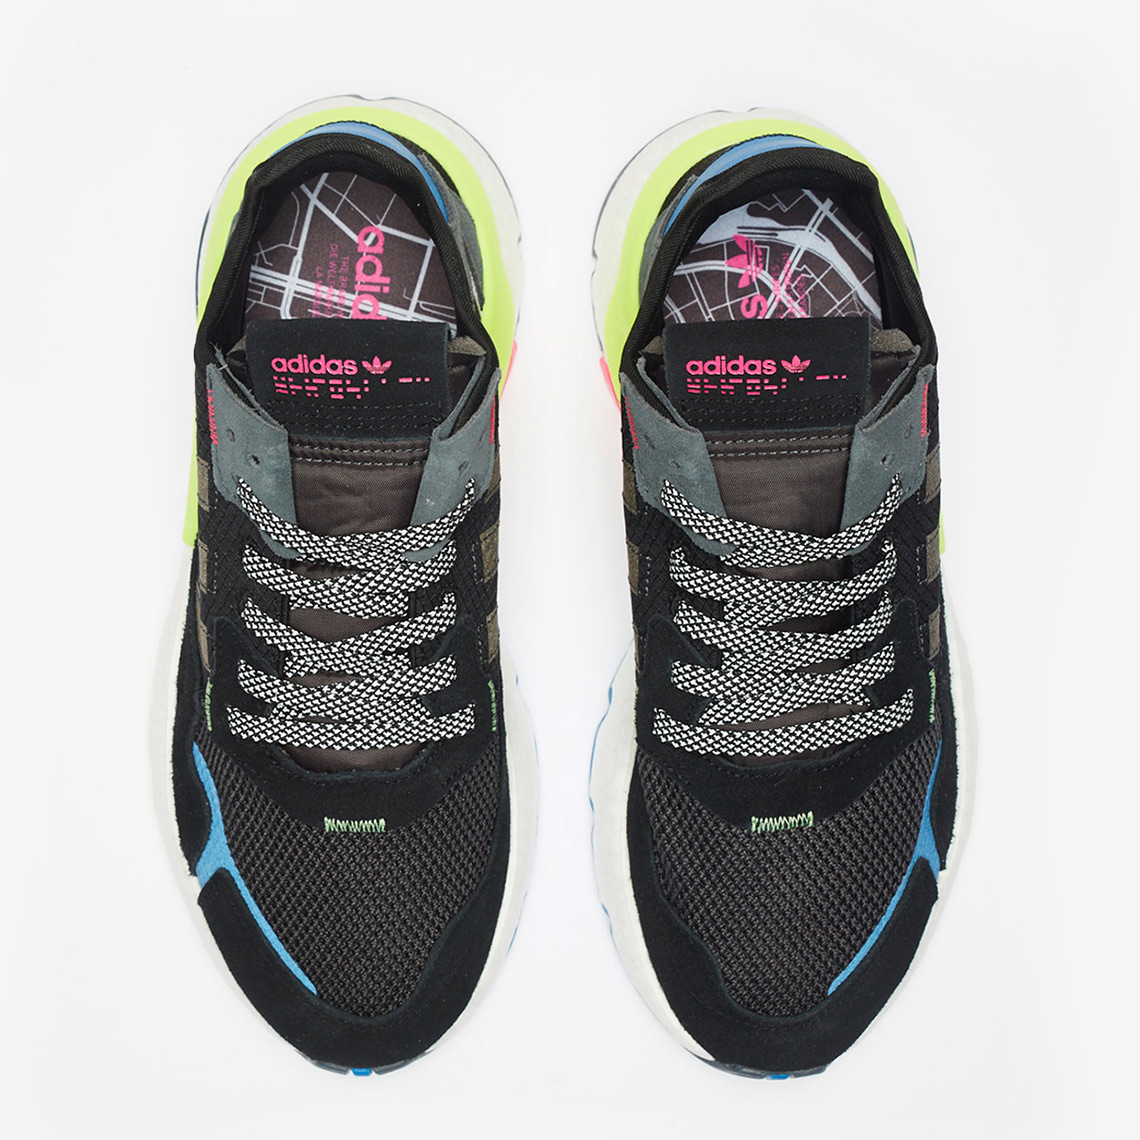 The adidas Nite Jogger Brings In Some Bright Neon Tones - SneakerNews.com